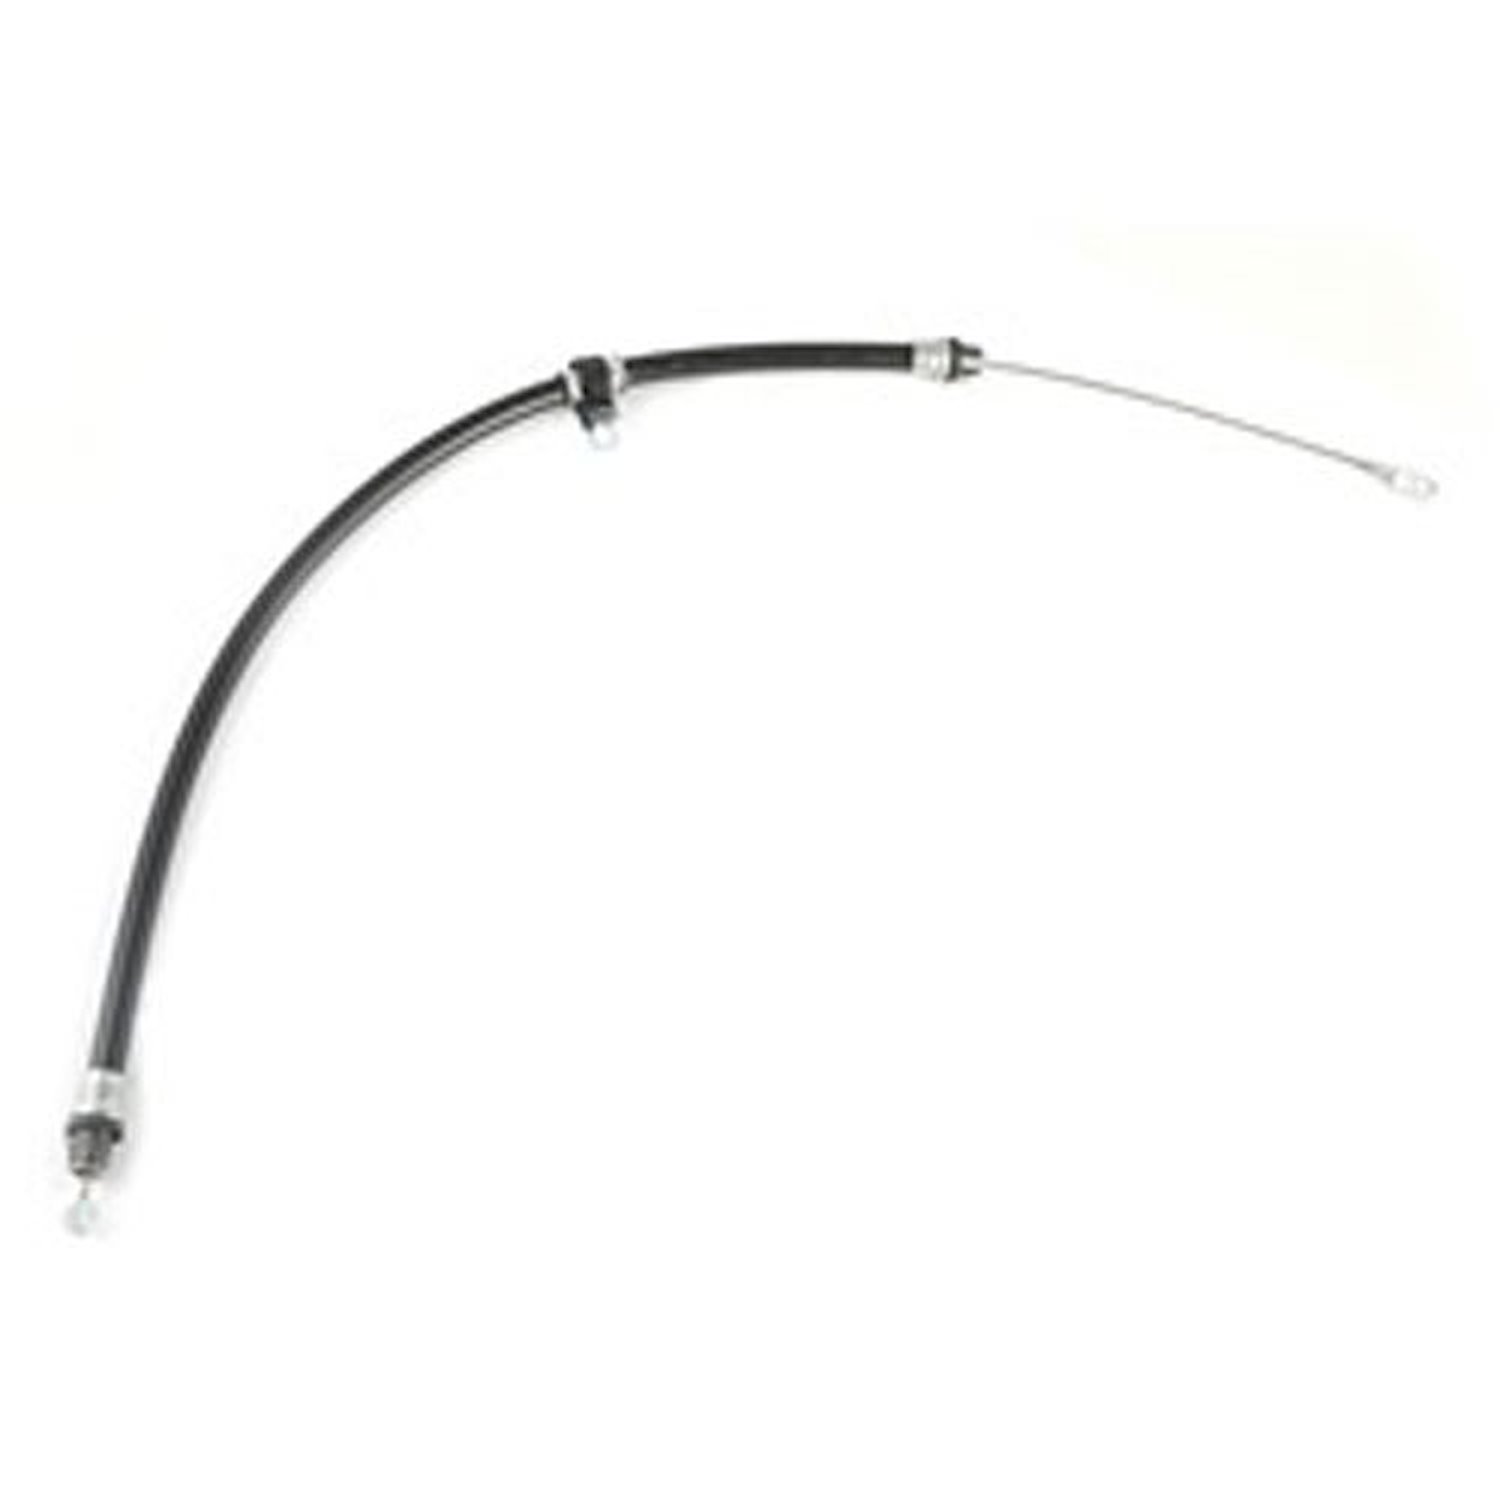 This front intermediate parking brake cable from Omix-ADA fits 05-09 Jeep Grand Cherokees.